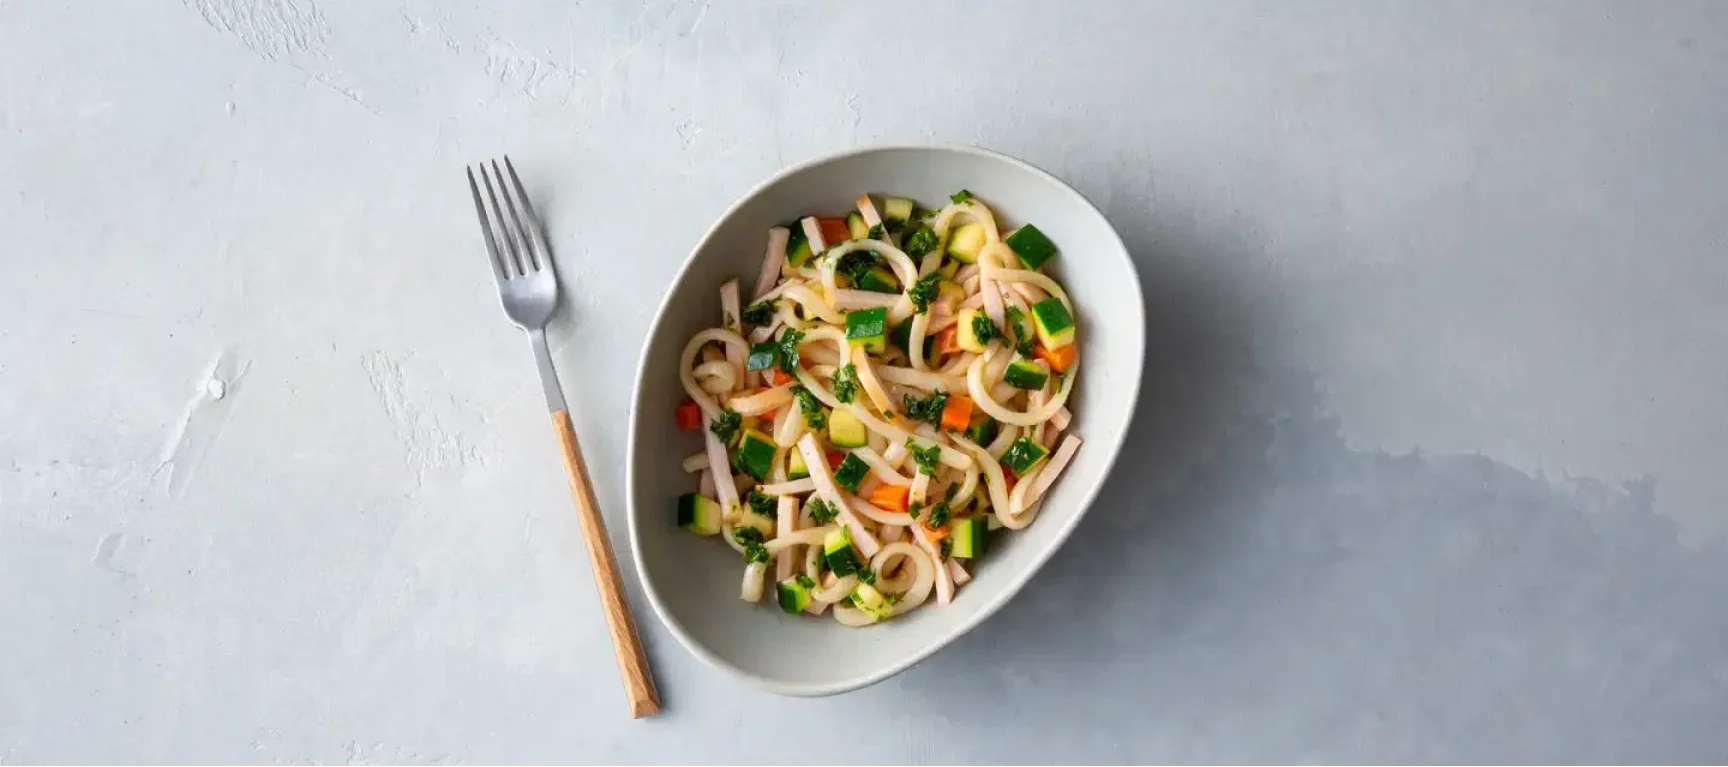 Udon noodles with chicken, carrot and parsley oil